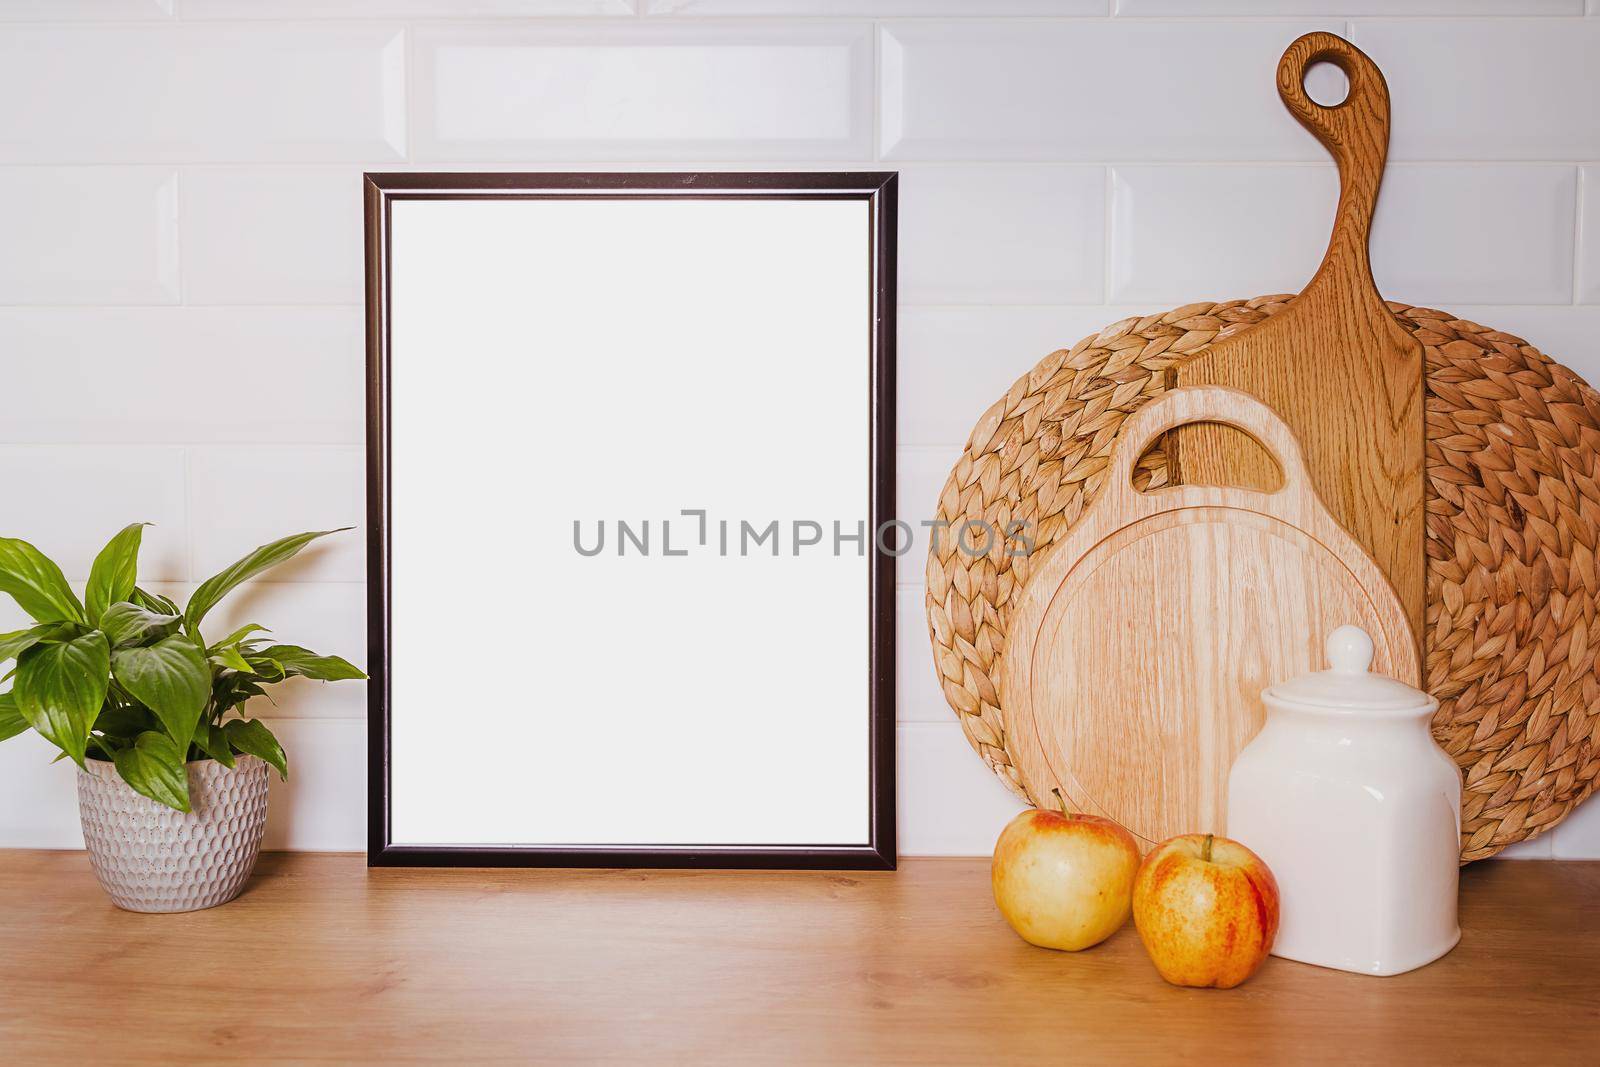 mockup in vintage style. the concept of natural cuisine and healthy food. Black frame with white sheet of paper, wooden boards for bread, fruit and ceramic utensils, flowers, copy paste